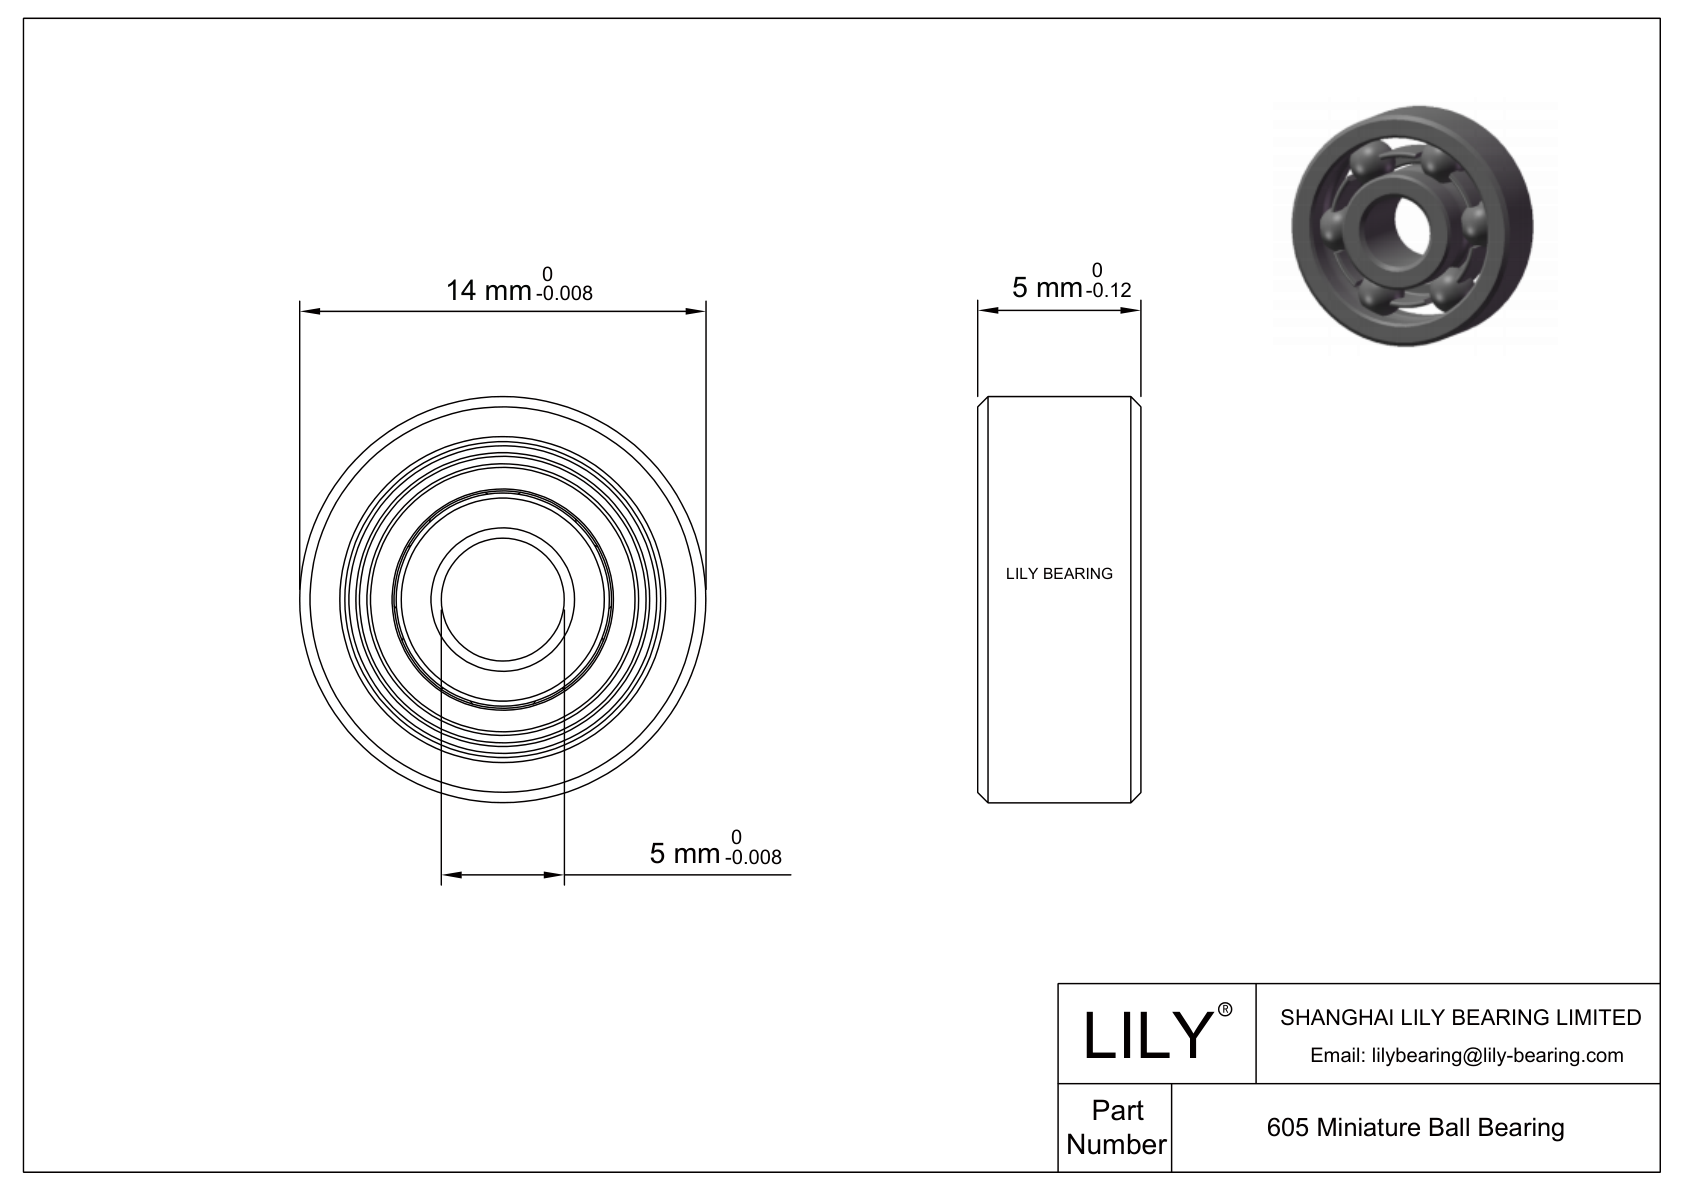 LILY-PU60518-5C1L6M4 Polyurethane Coated Bearing With Screw cad drawing